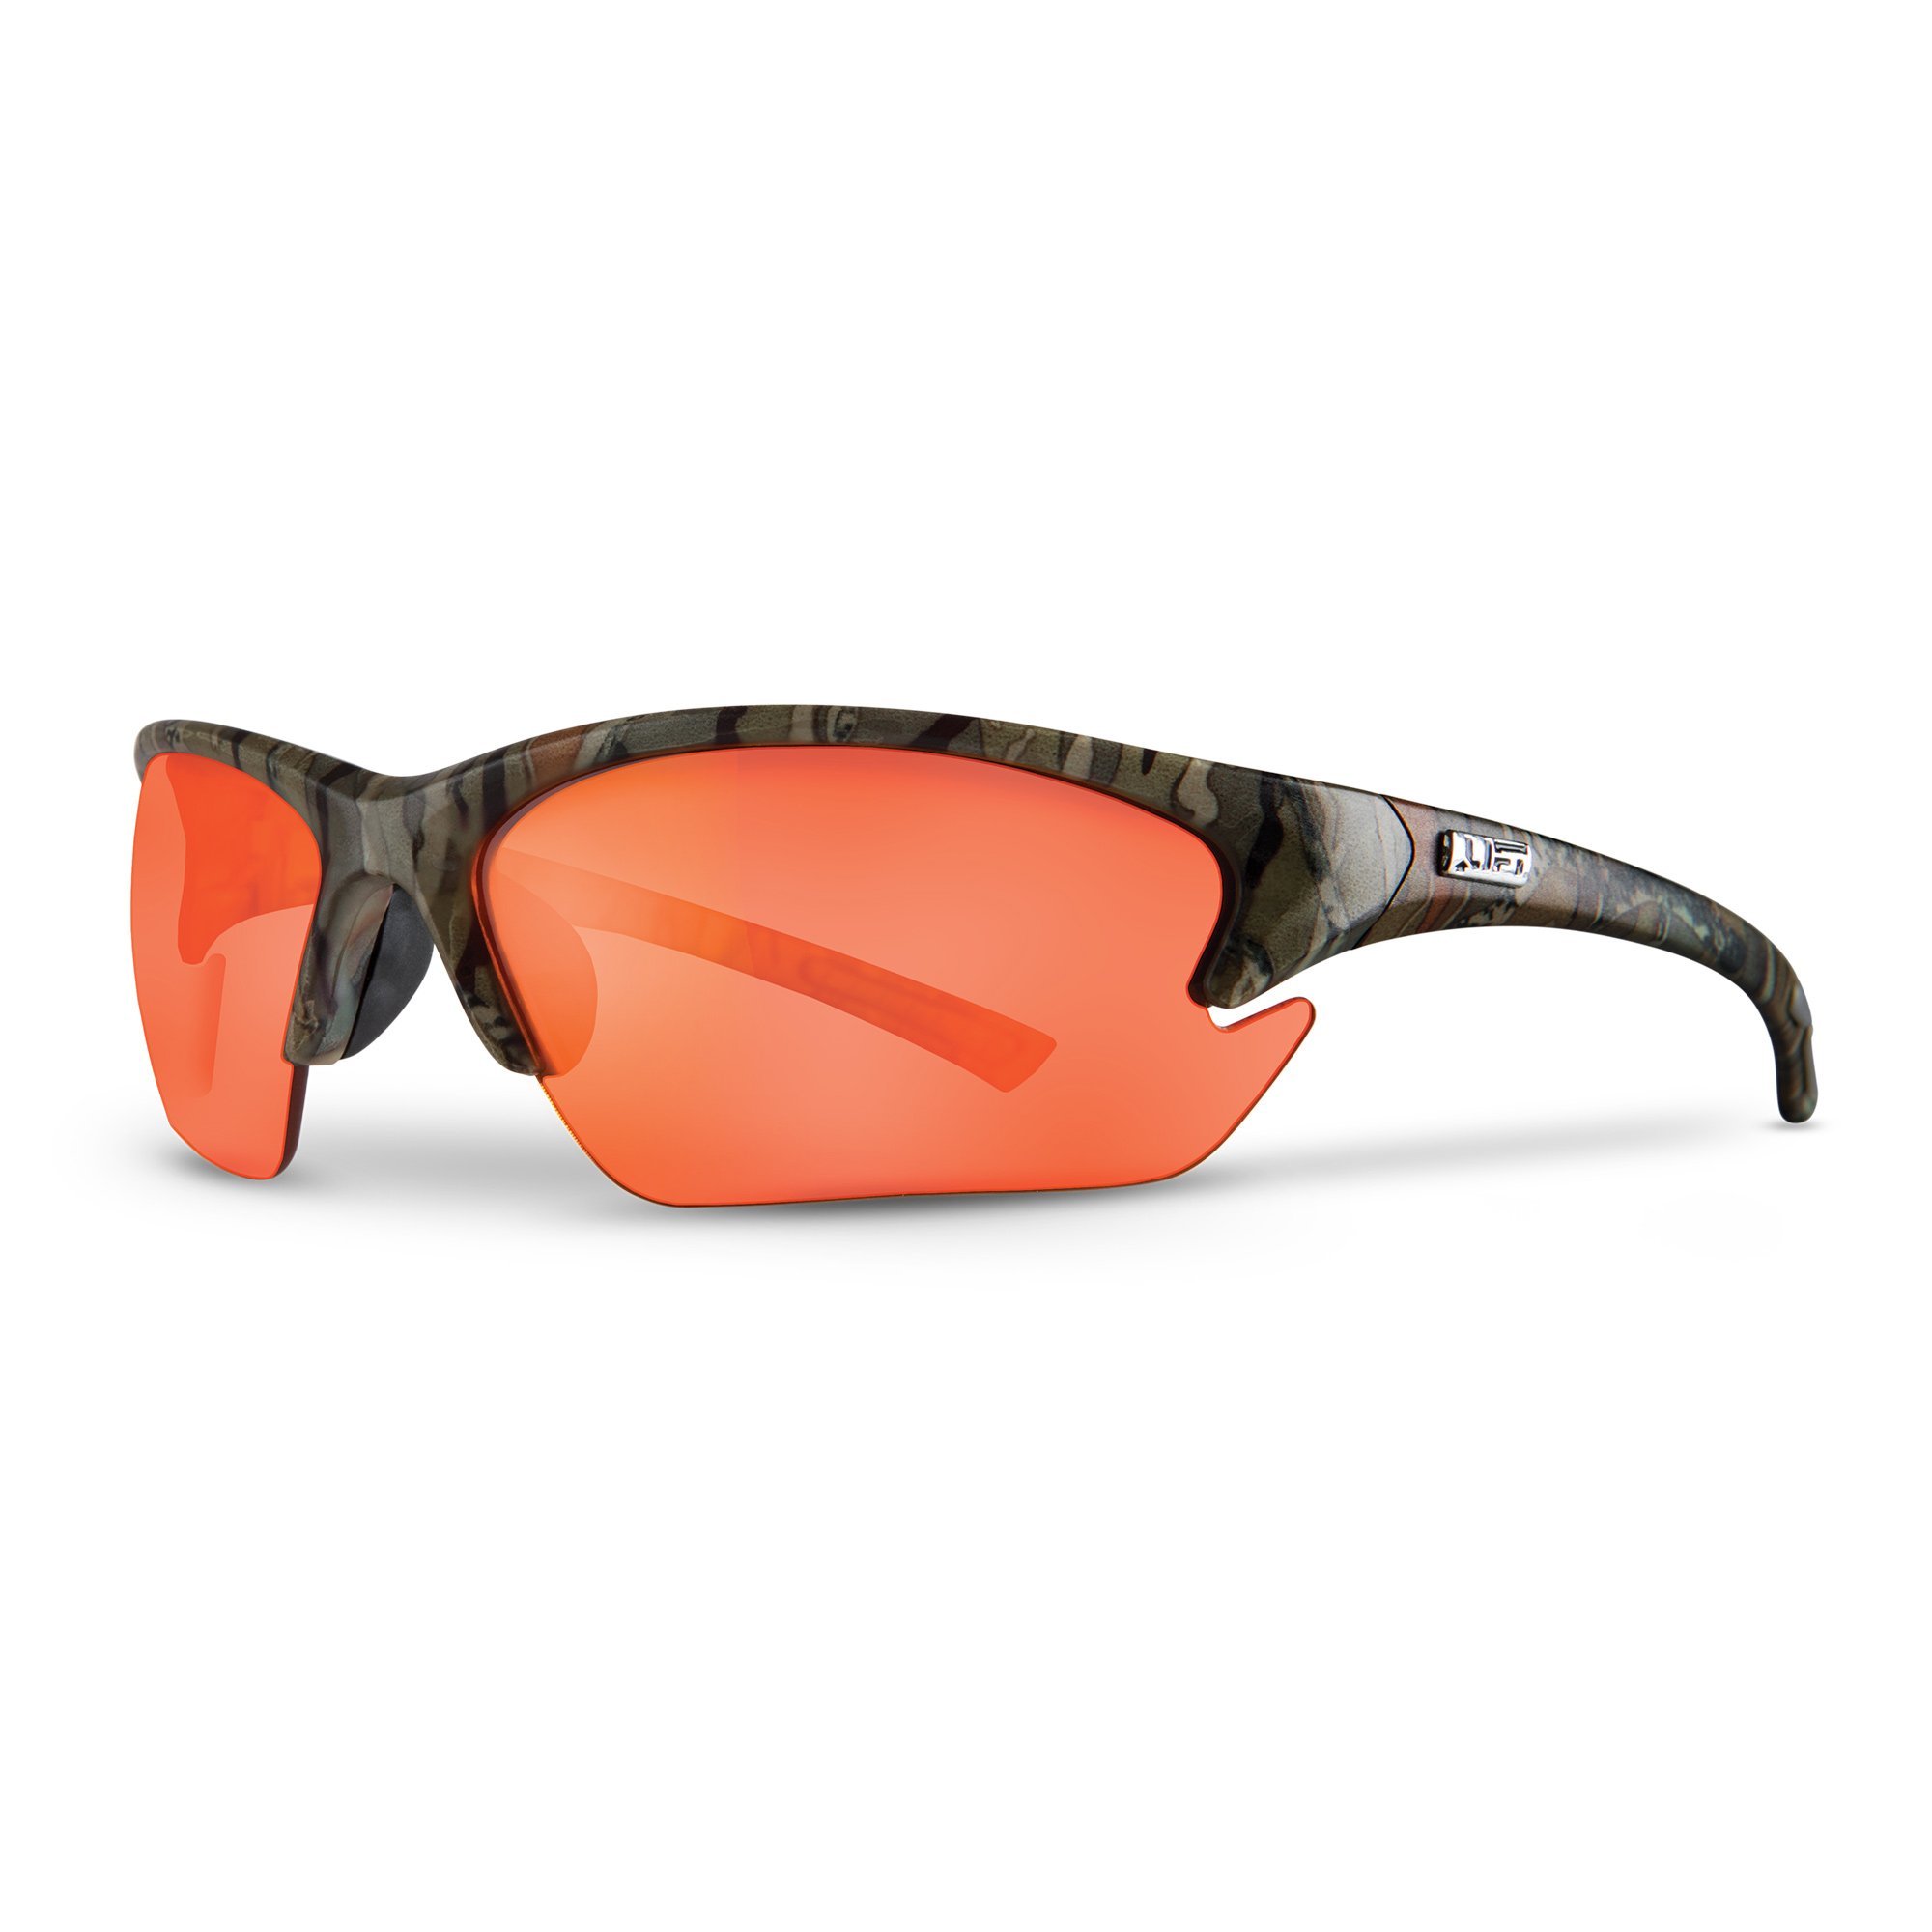 QUEST SAFETY GLASSES - CAMO